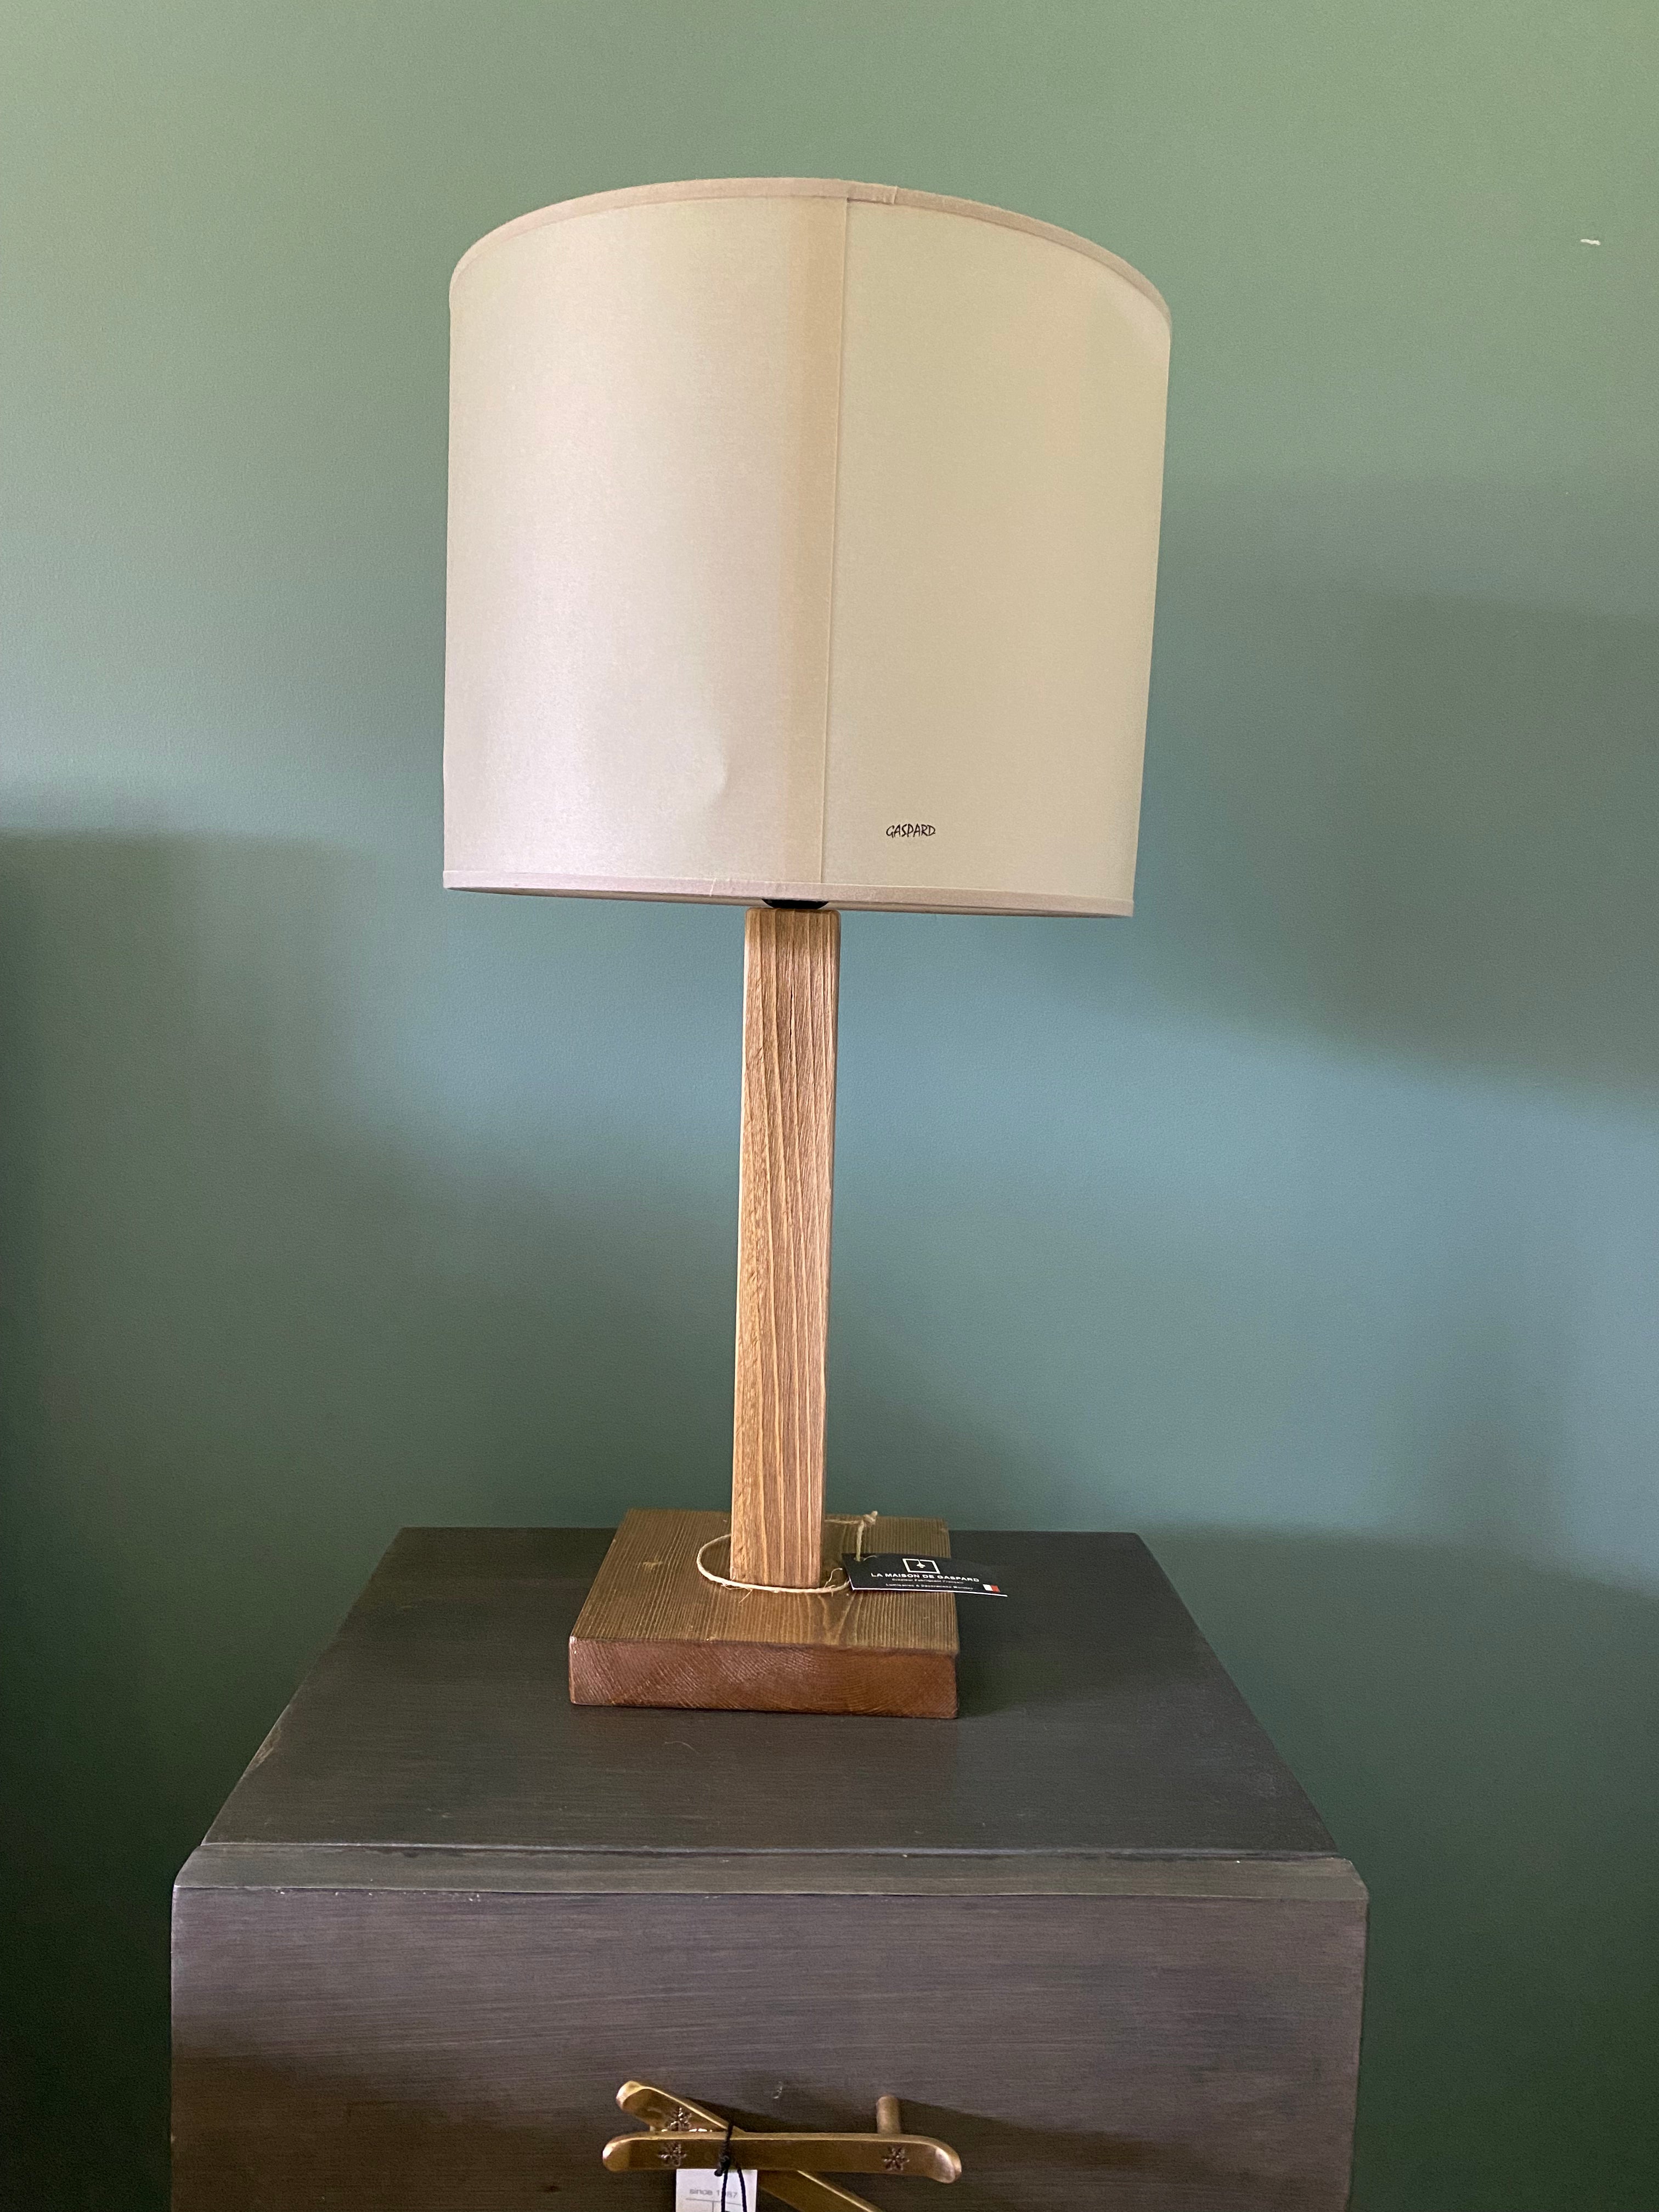 View of the back of the lamp and shade. Lamp with a square solid wooden base and square stem holding up the canvas printed beige lamp shade. The back of beige shade is blank. On a wooden table with brass ski handles against a green wall.